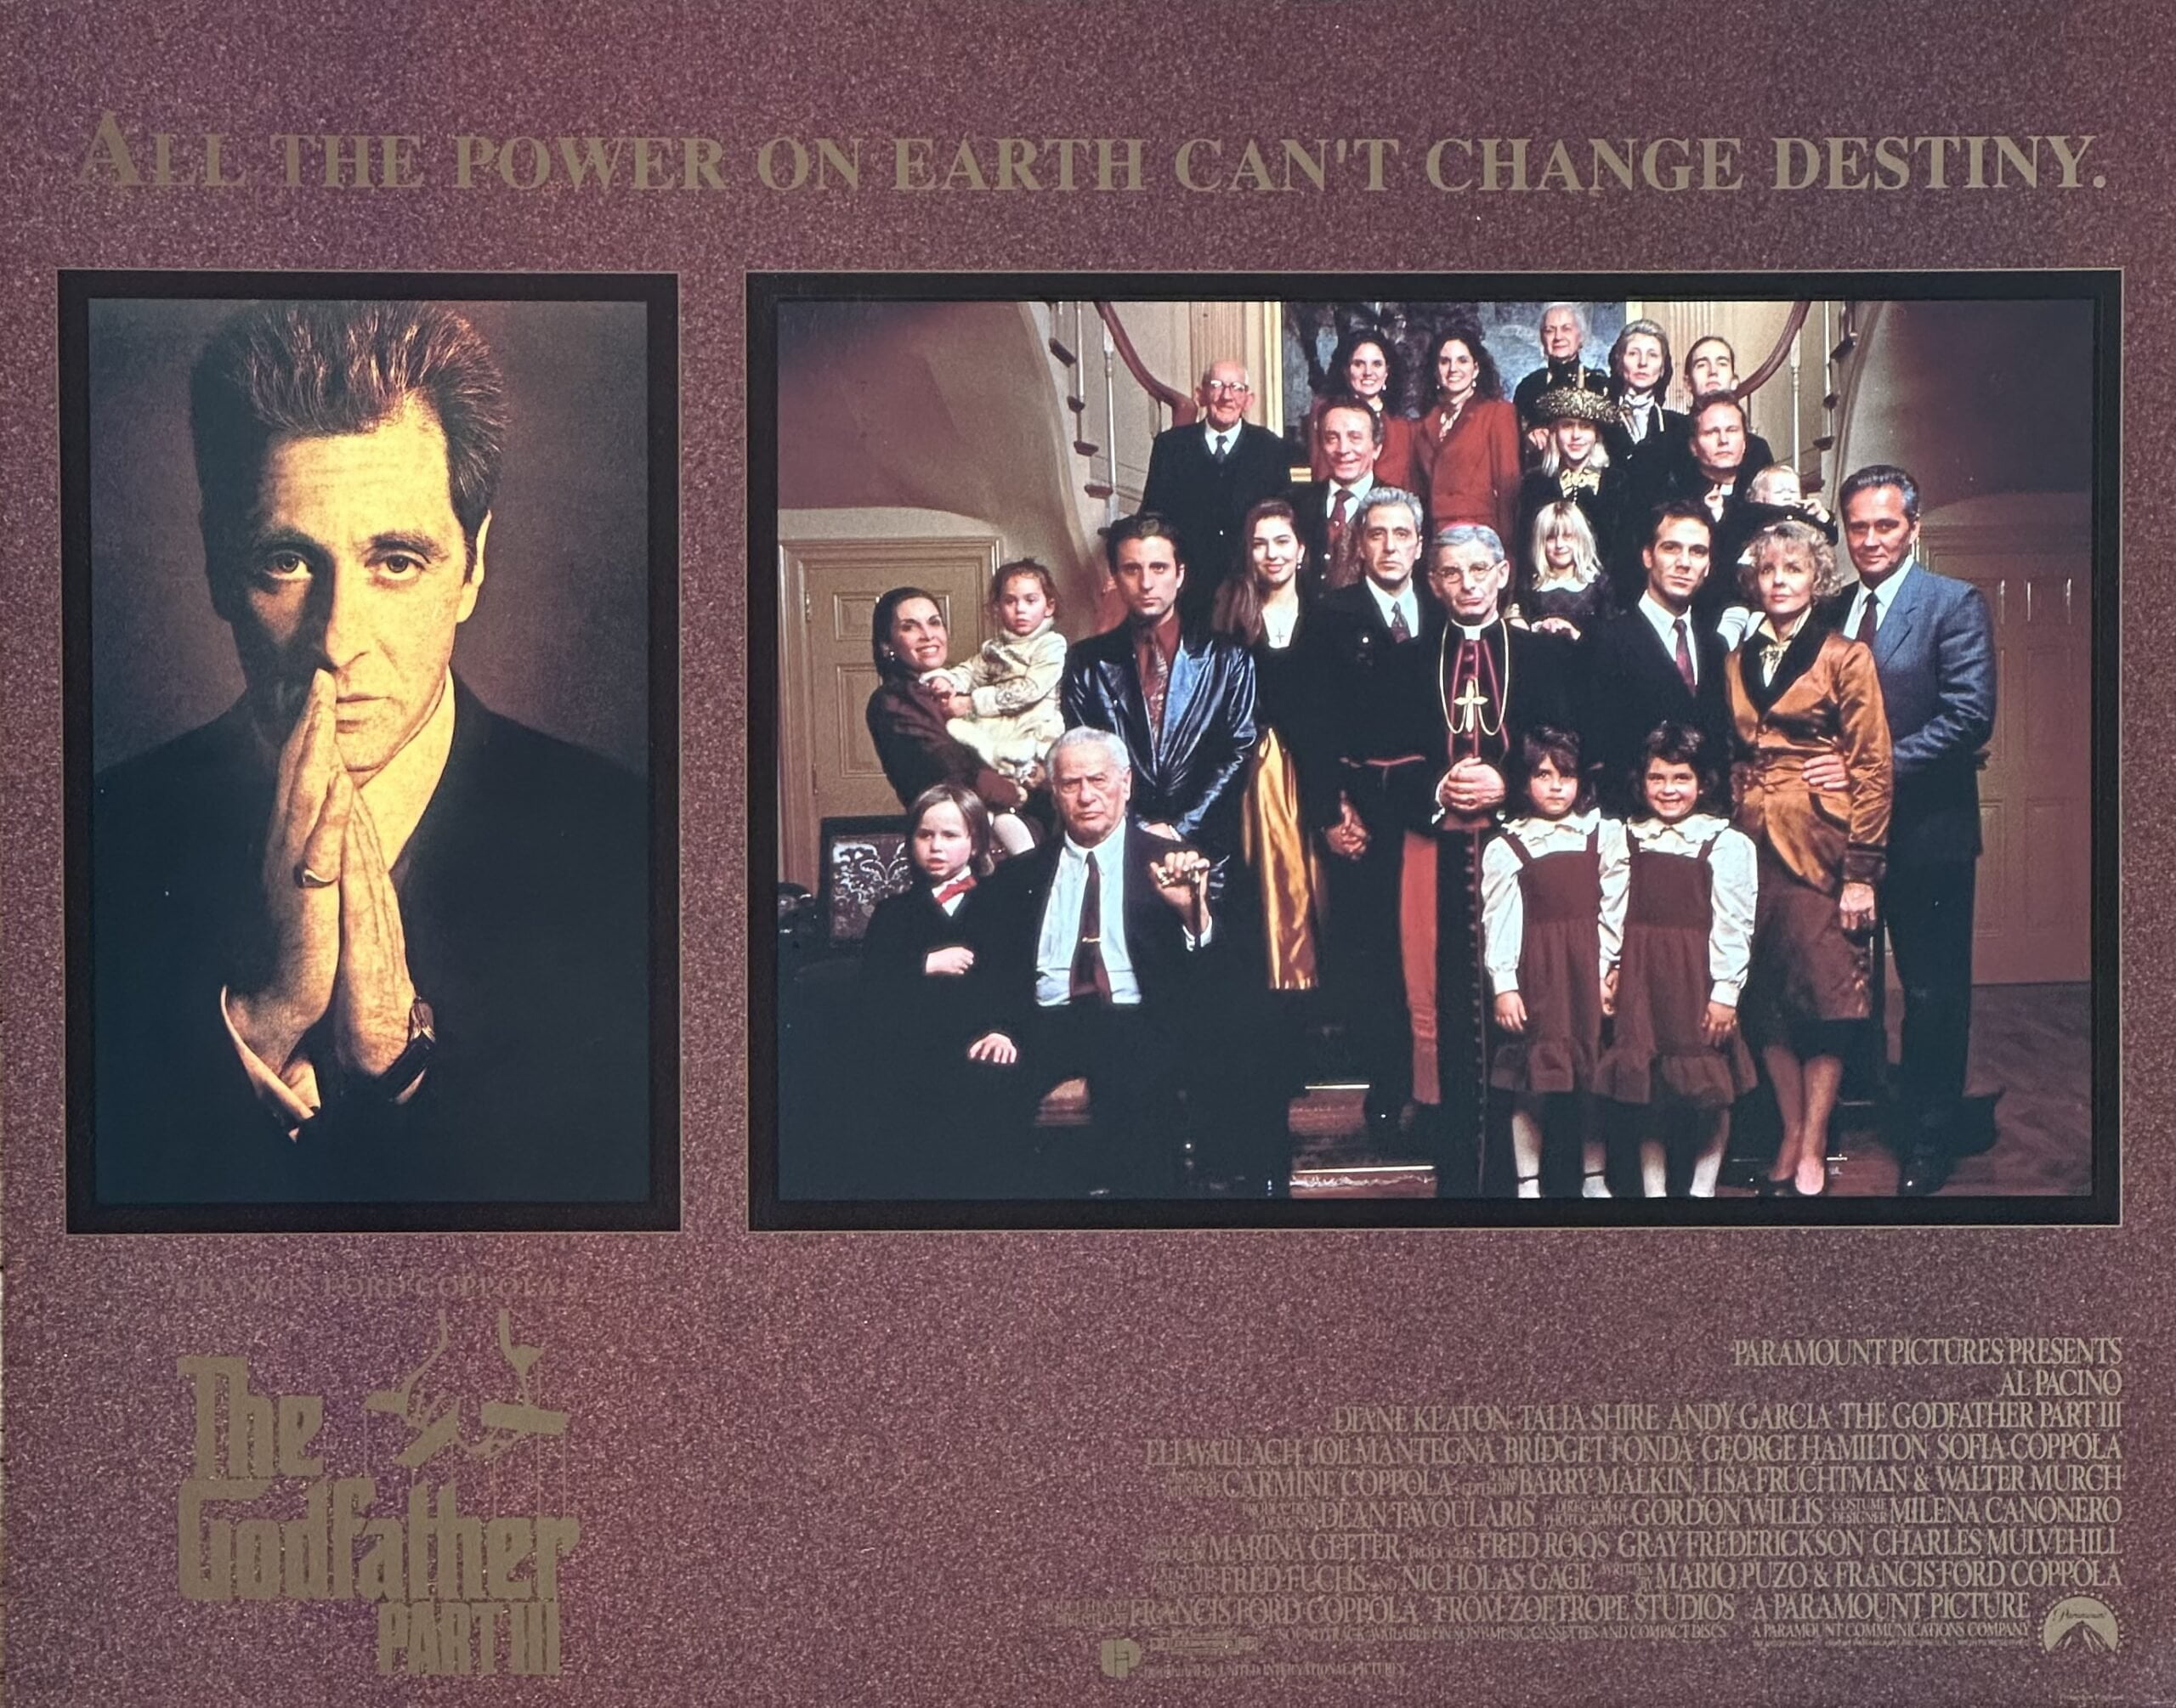 Original vintage cinema lobby card movie poster for The Godfather Part III